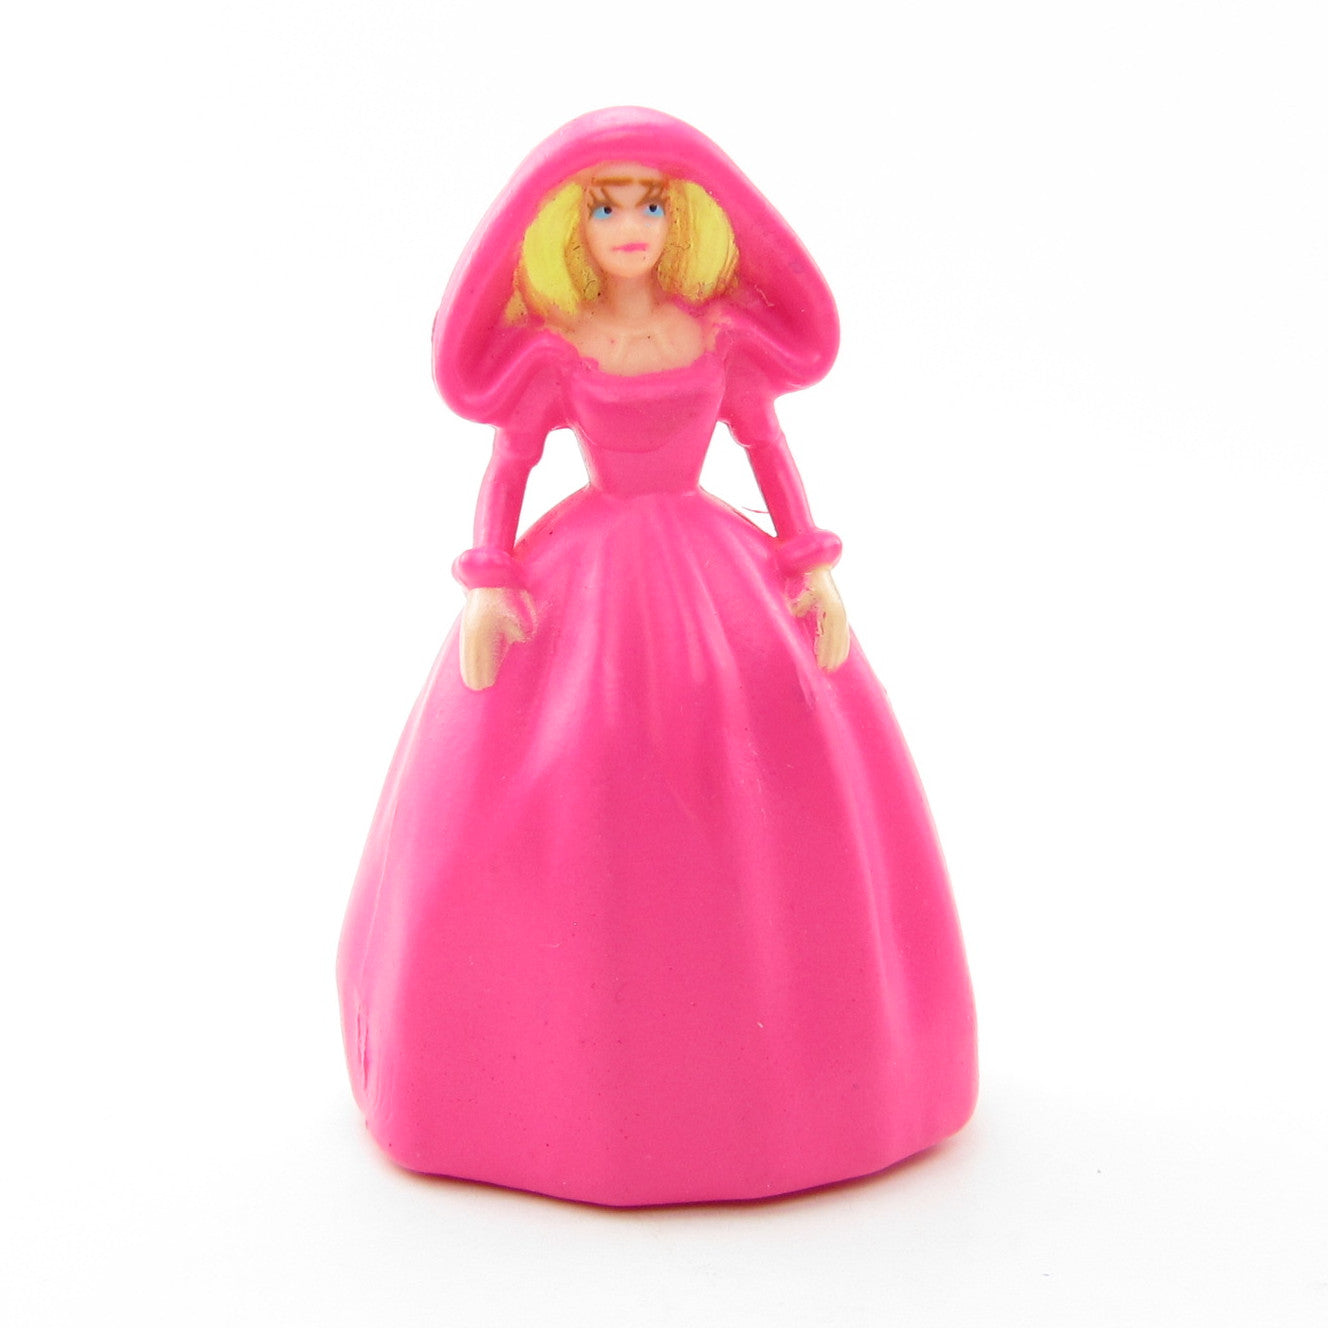 Miniature Barbie doll from toy store playset